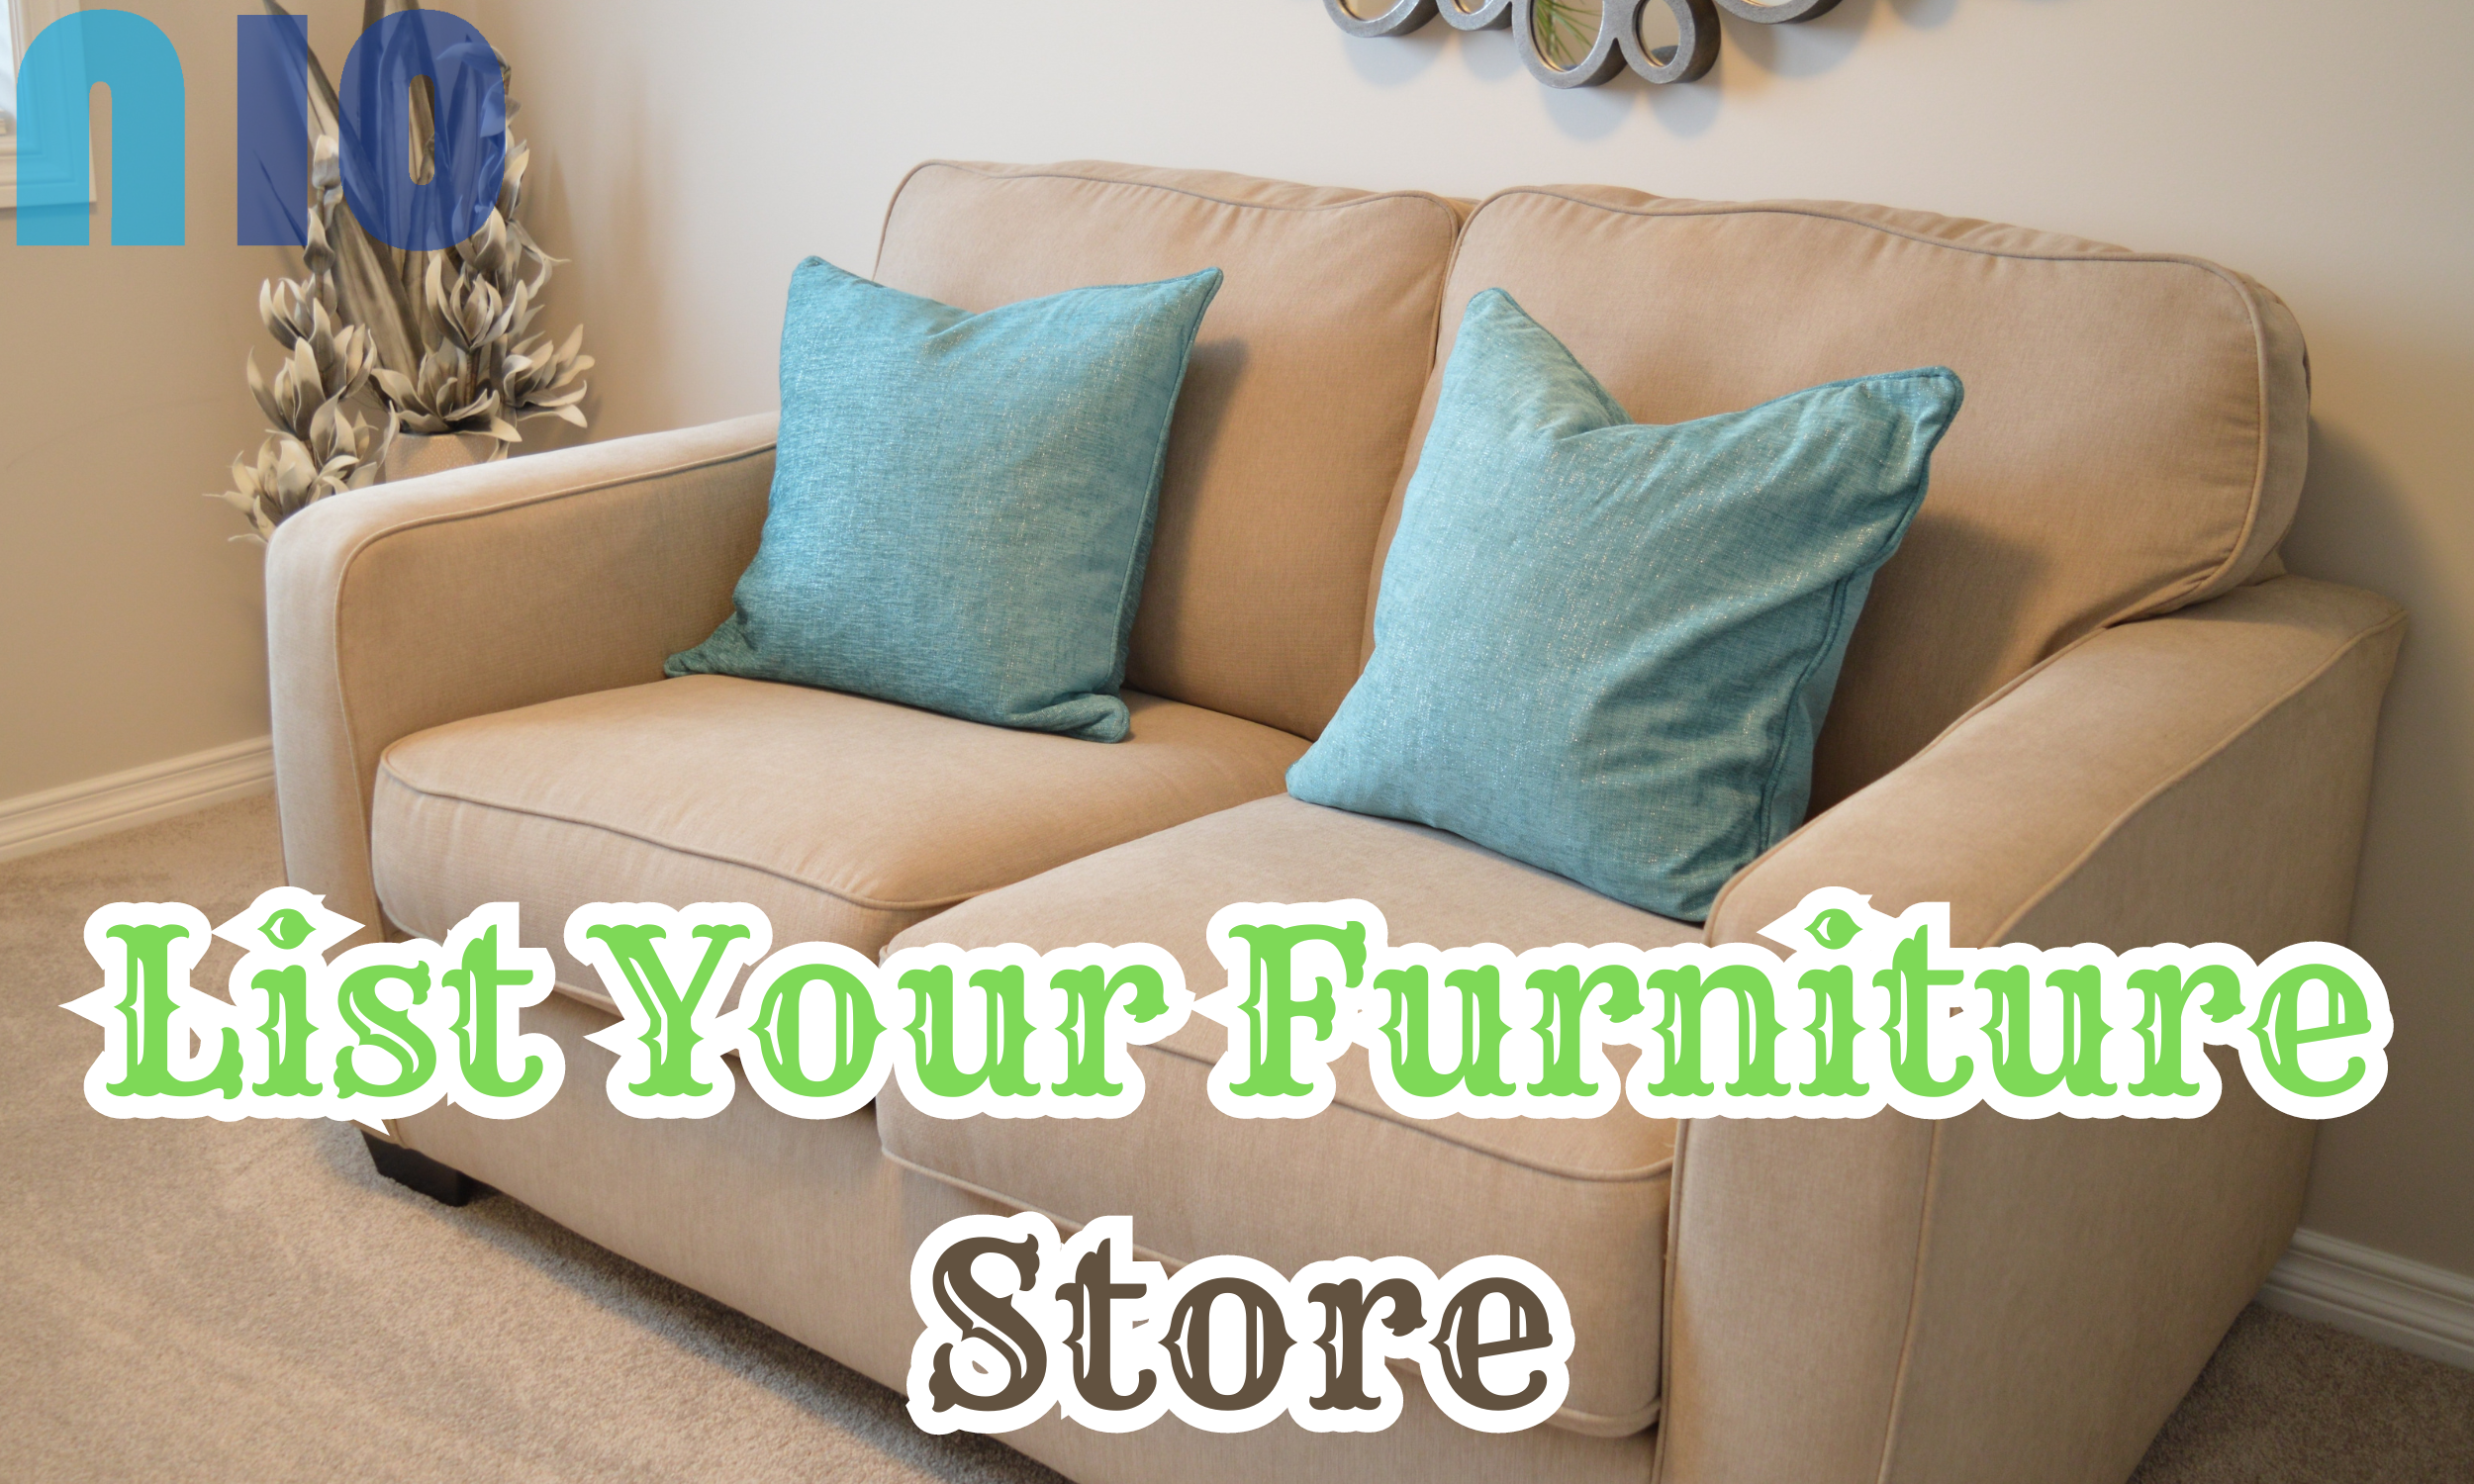  List Your Furniture Store In Lucknow